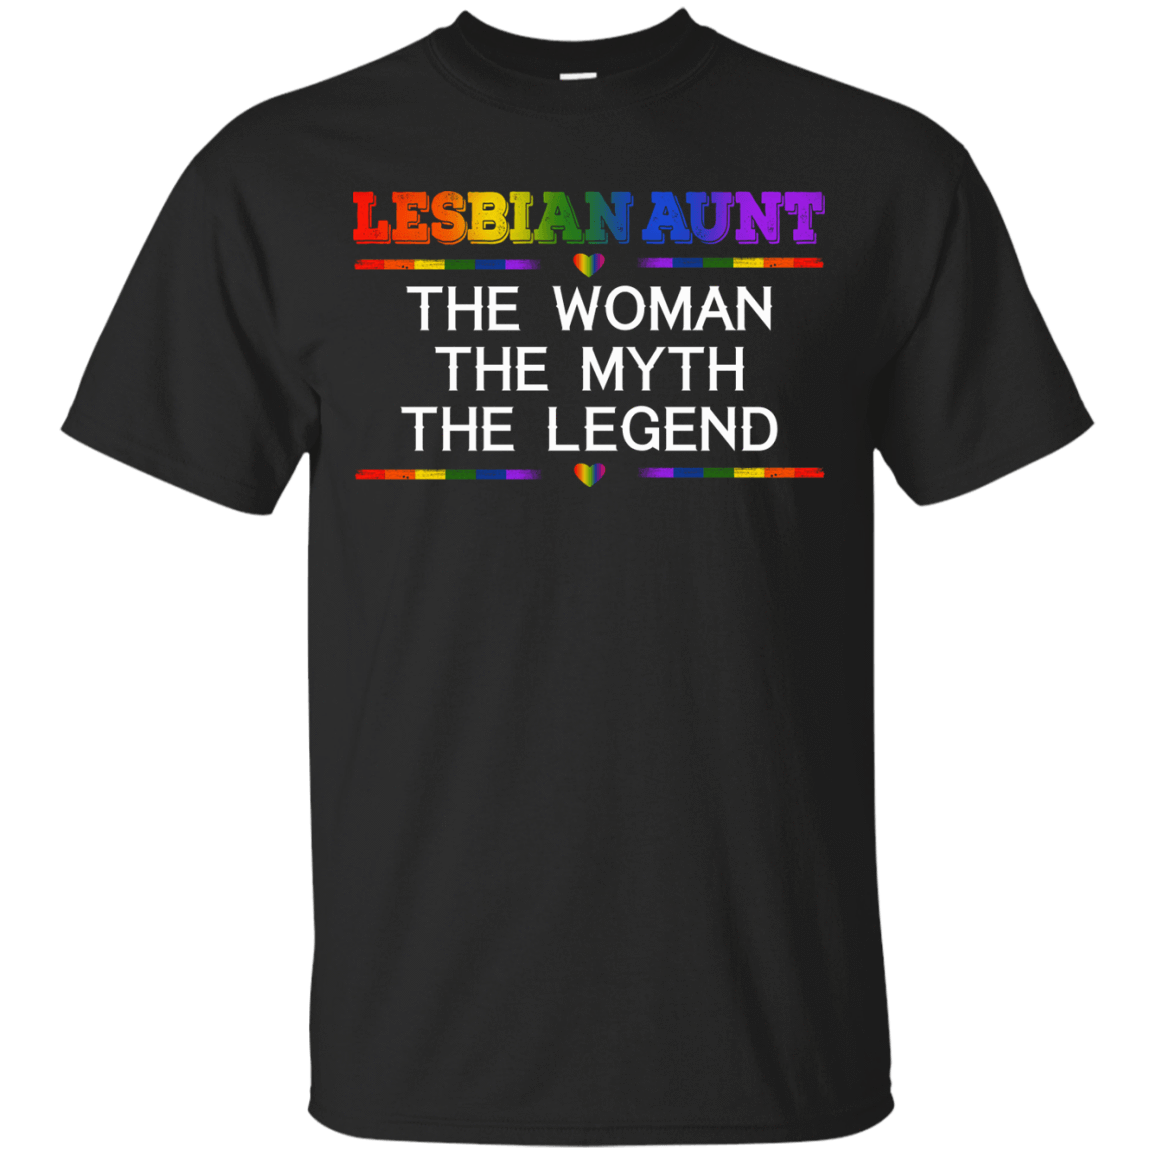 Amazing Tee Lesbian Aunt The Woman The Myth The Legend Shirts